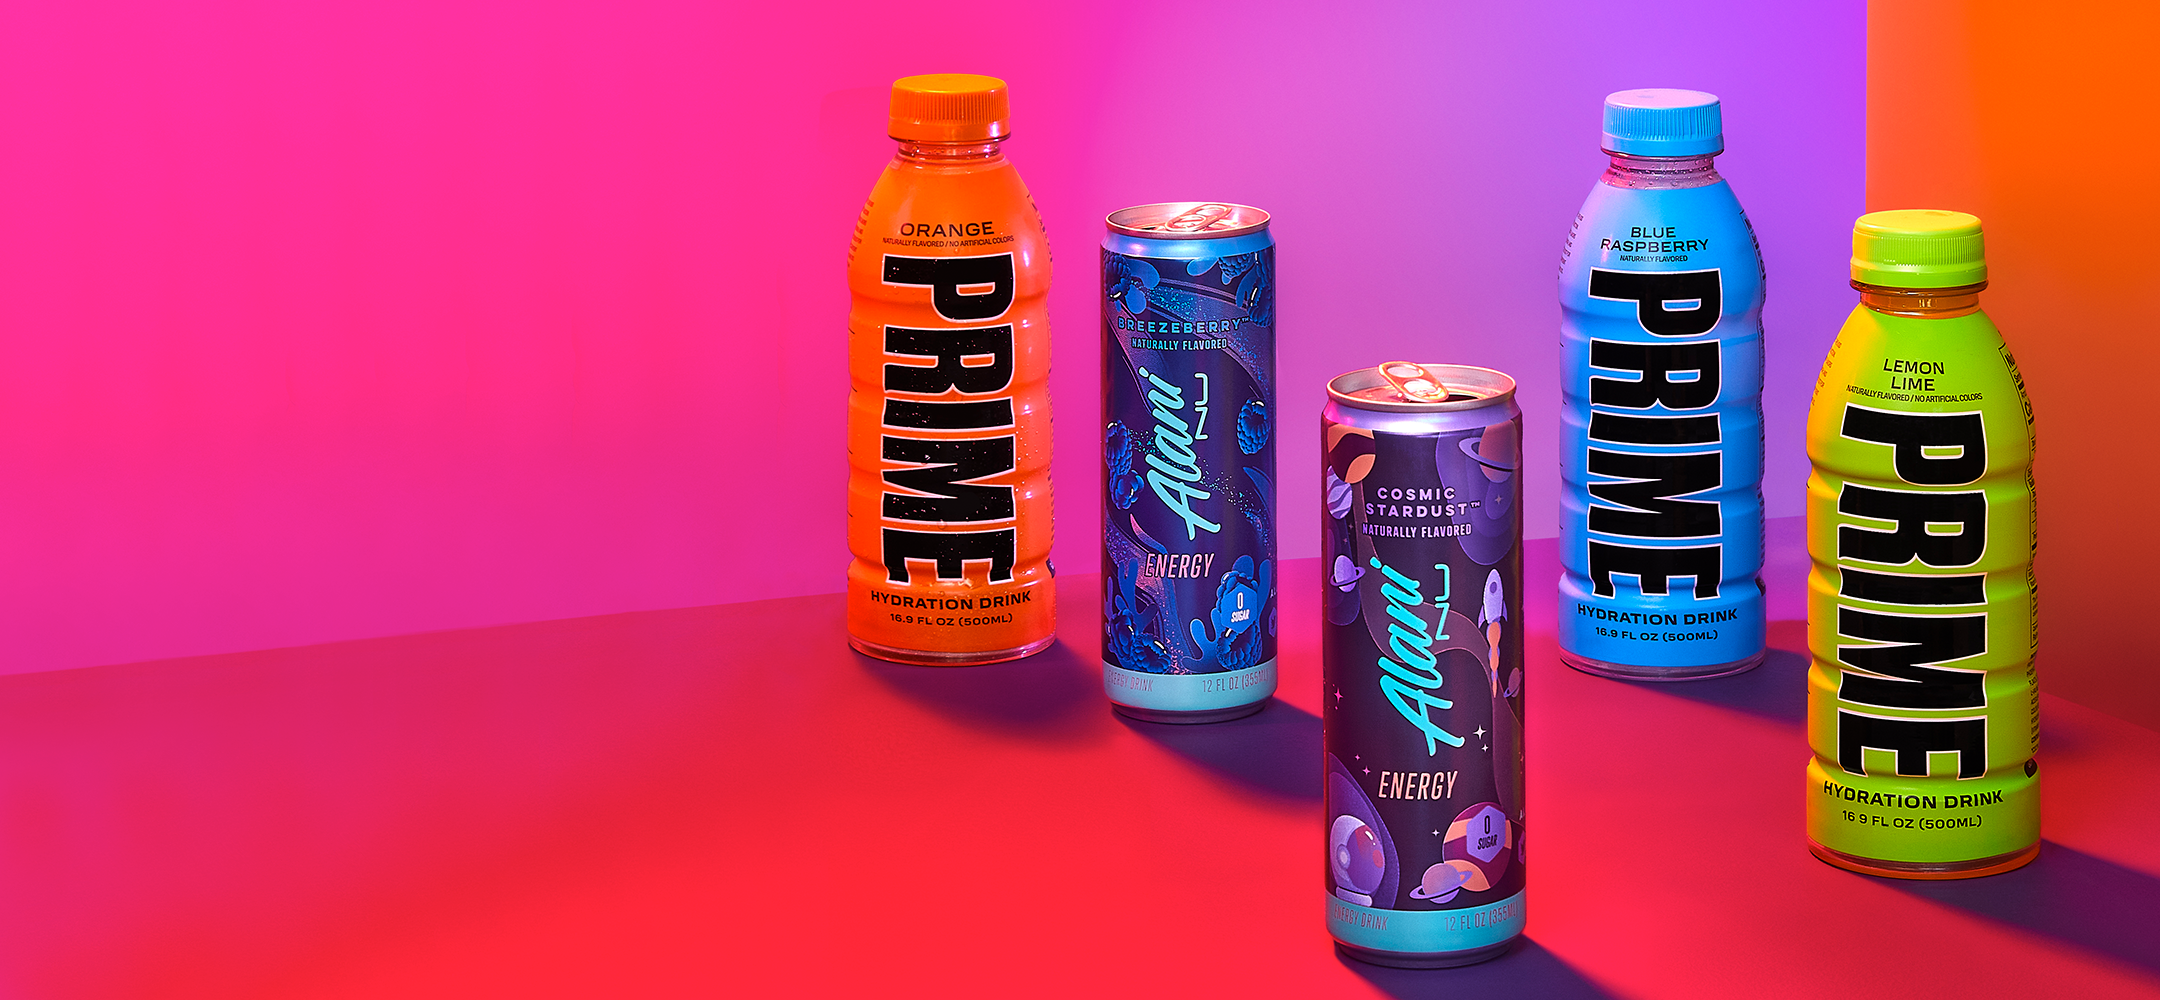  An eye-catching array of Prime hydration drinks in Blue Raspberry and Lemon Lime, alongside Alani Nu energy drinks in Cosmic Stardust flavor, is elegantly displayed.